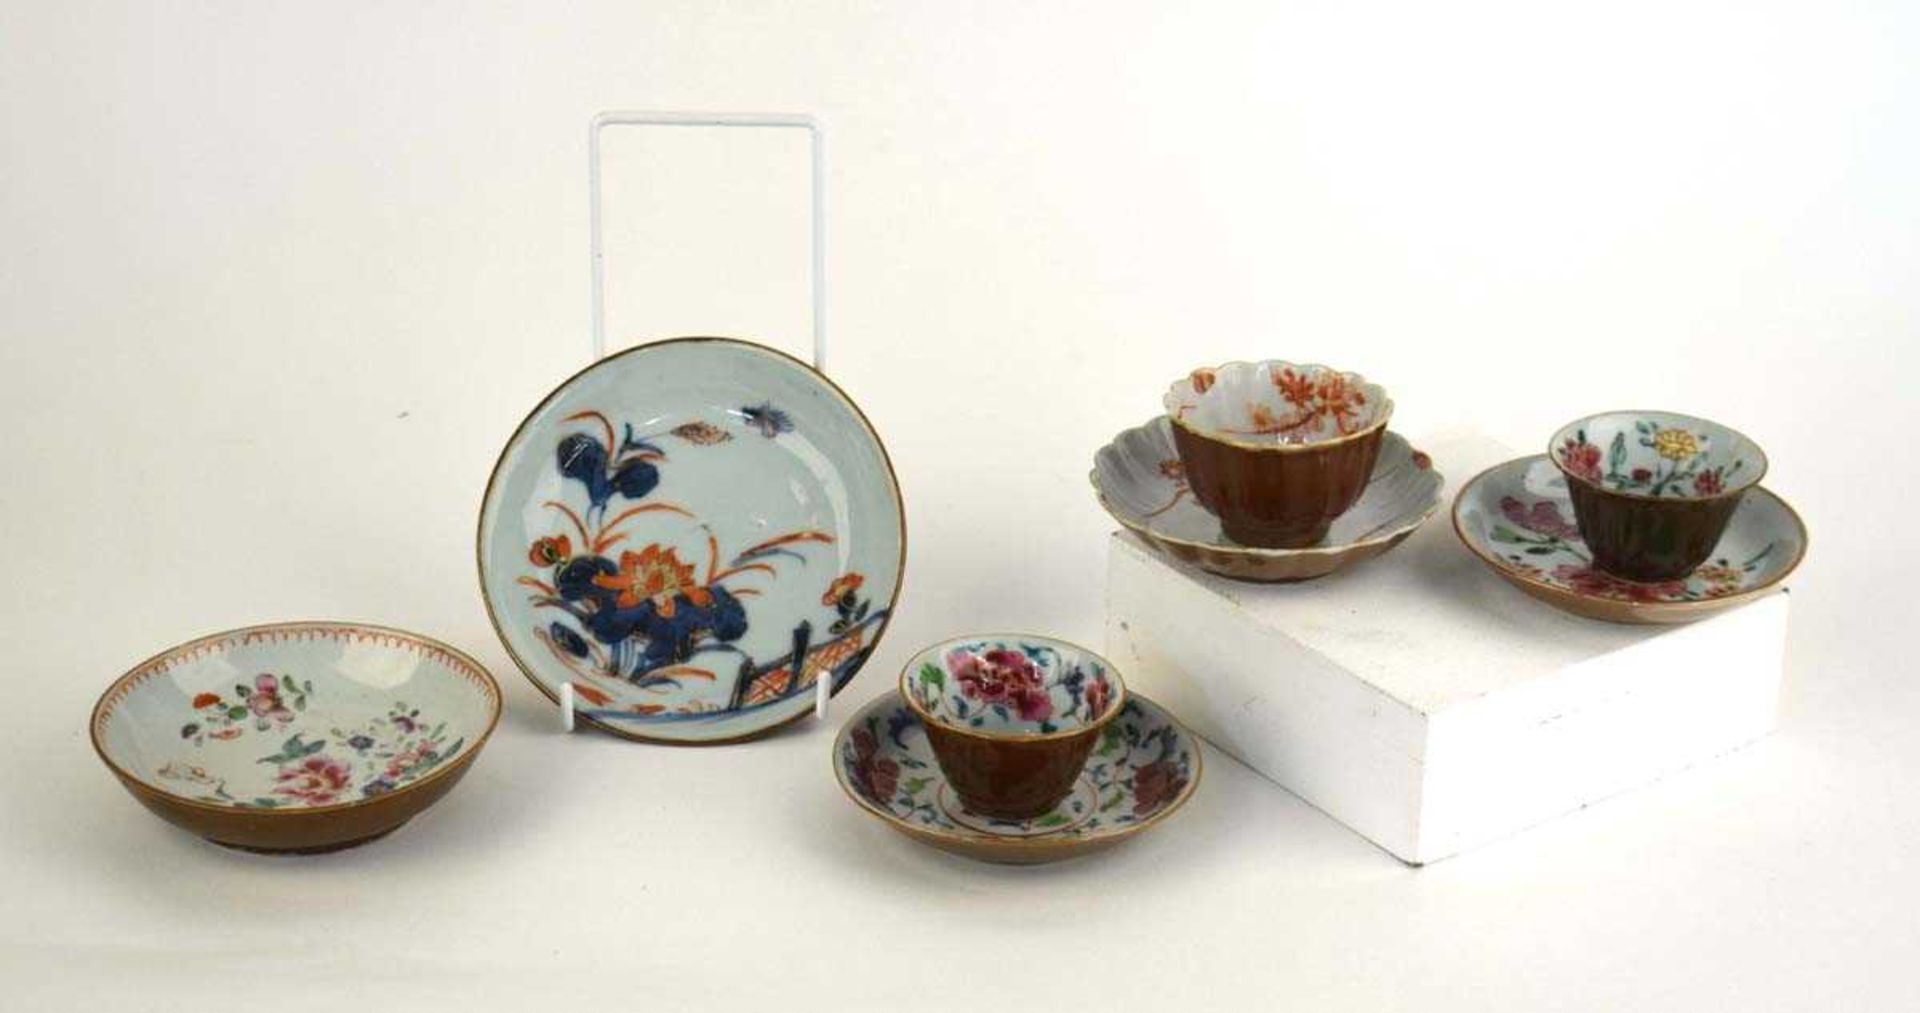 Eight items of Batavia porcelain, each decorated with foliate motifs in coloured enamels including a